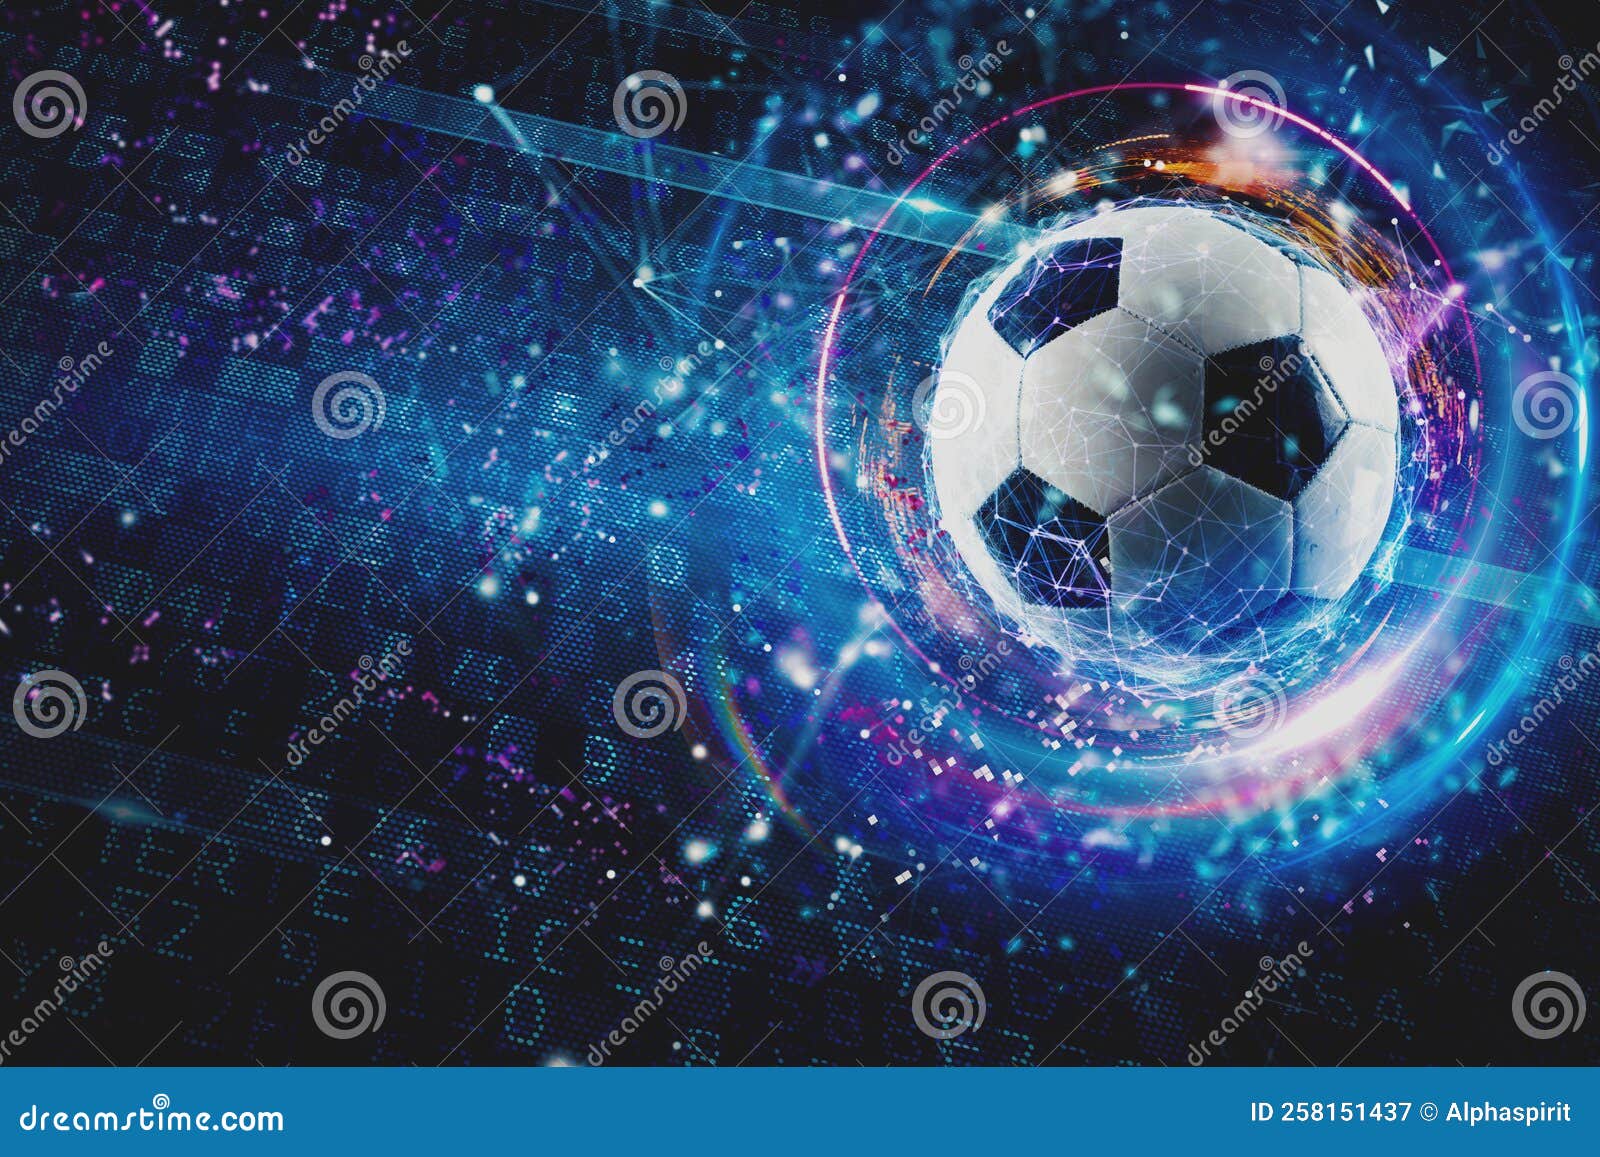 Internet Live Streaming of a Soccer Match Stock Image